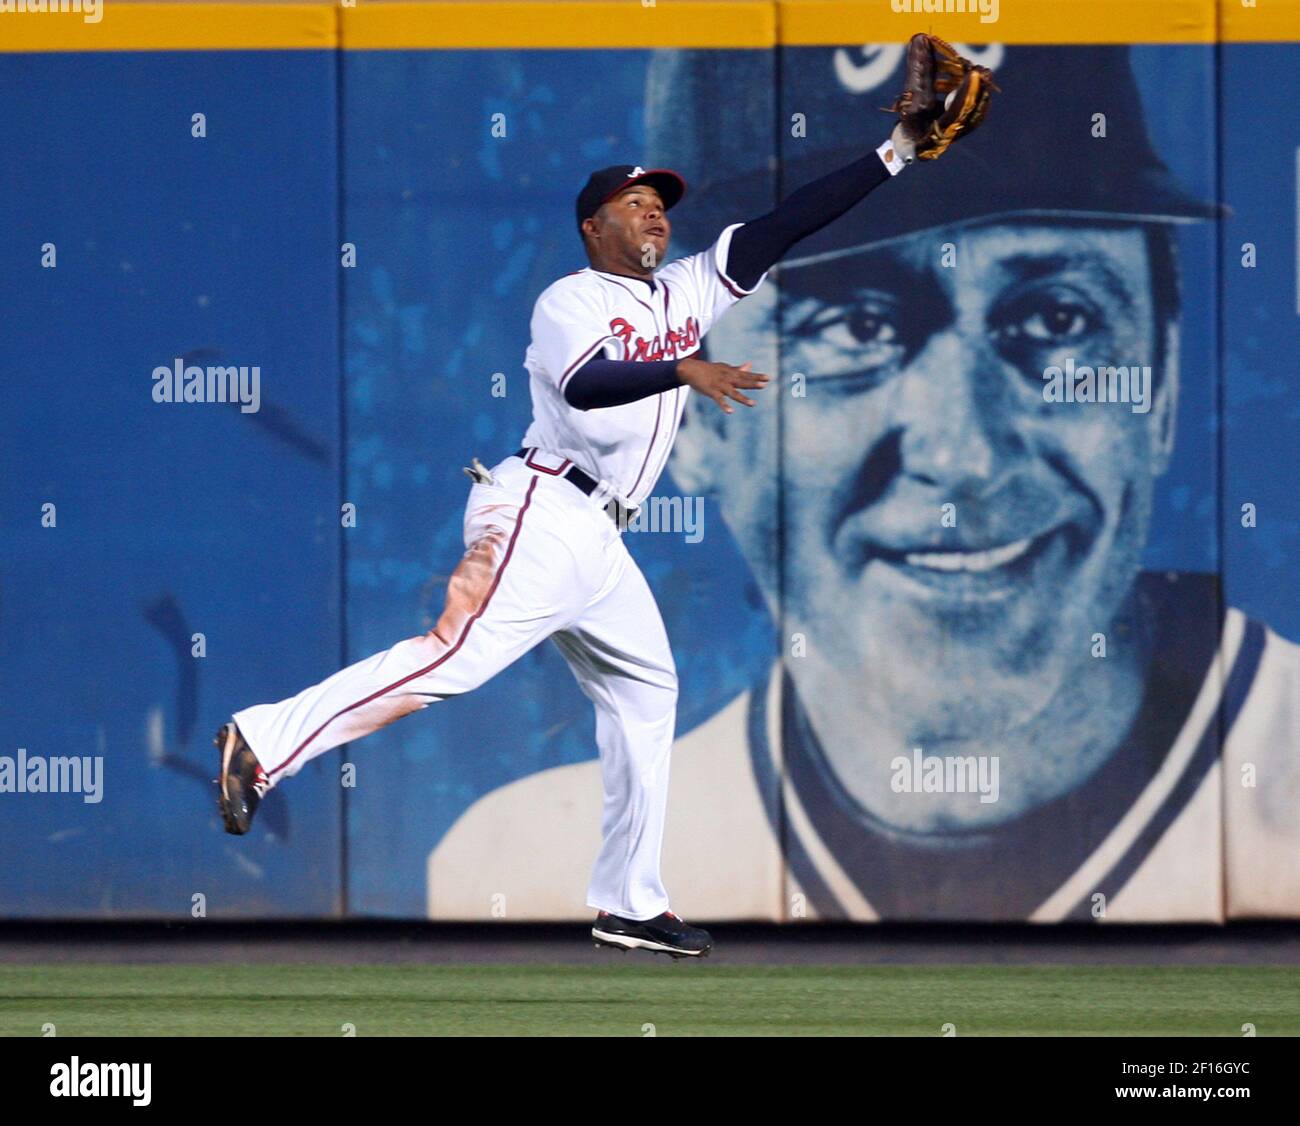 Atlanta Braves center fielder Andruw Jones make a leaping catch to